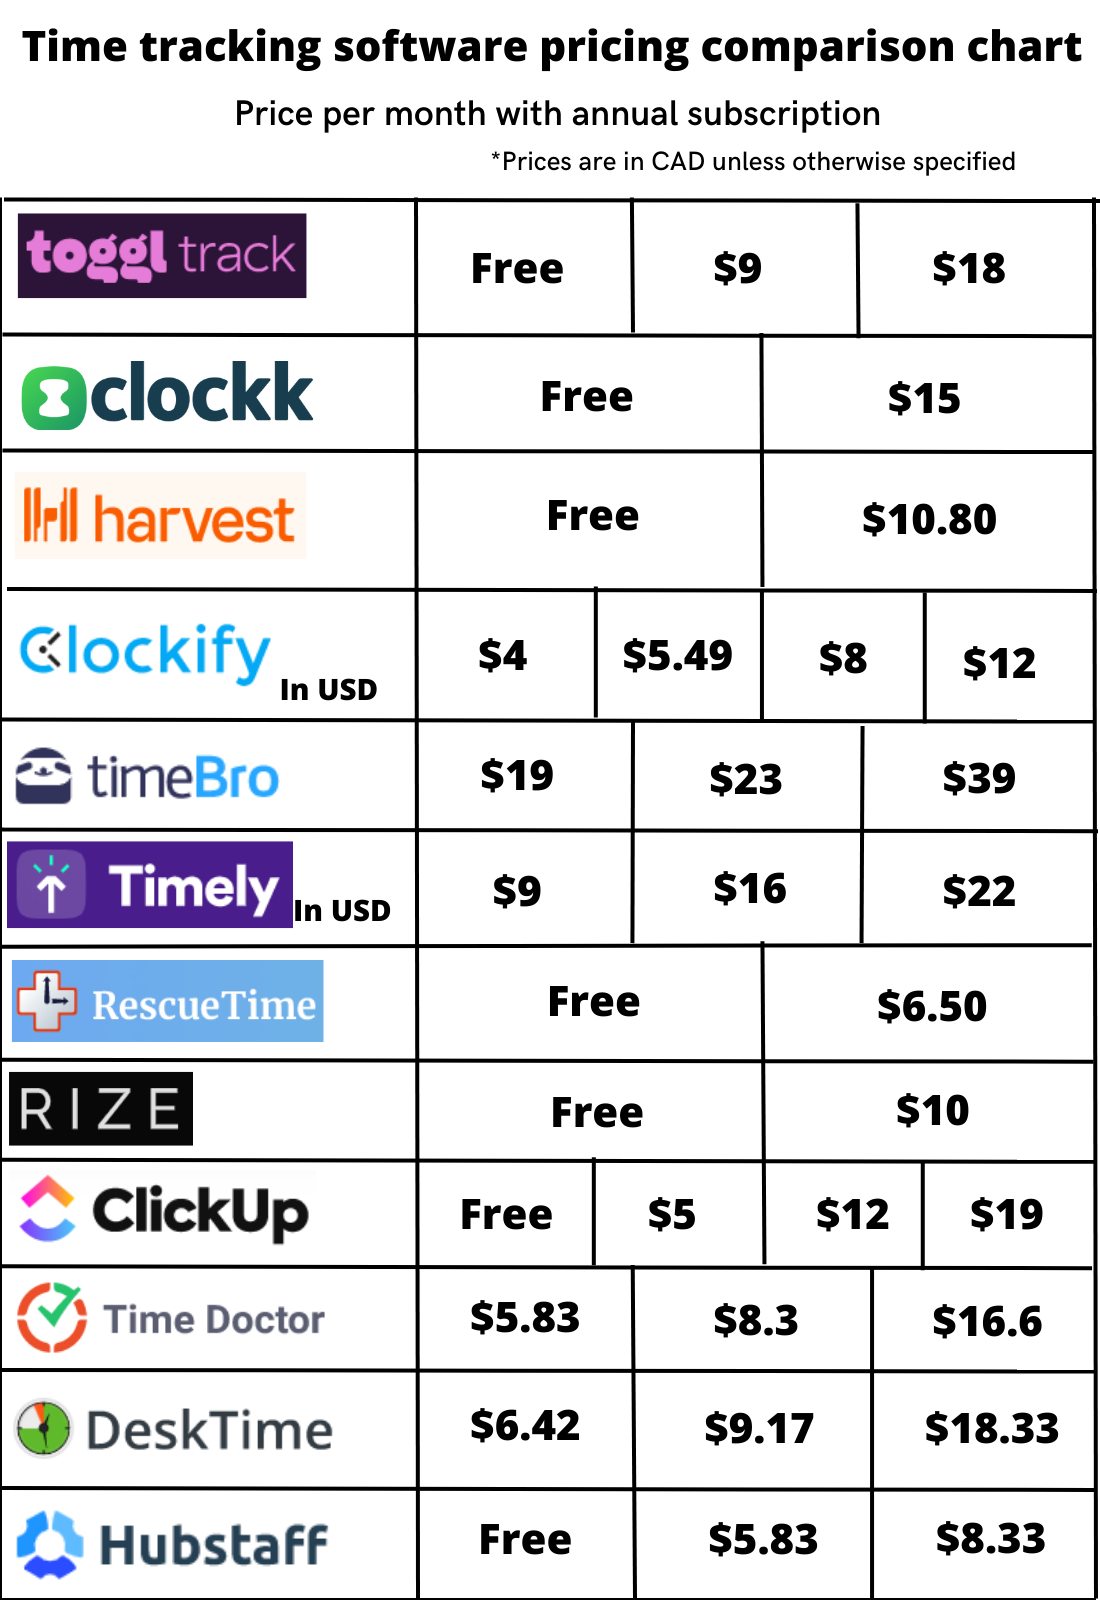 Time tracking software pricing comparison chart